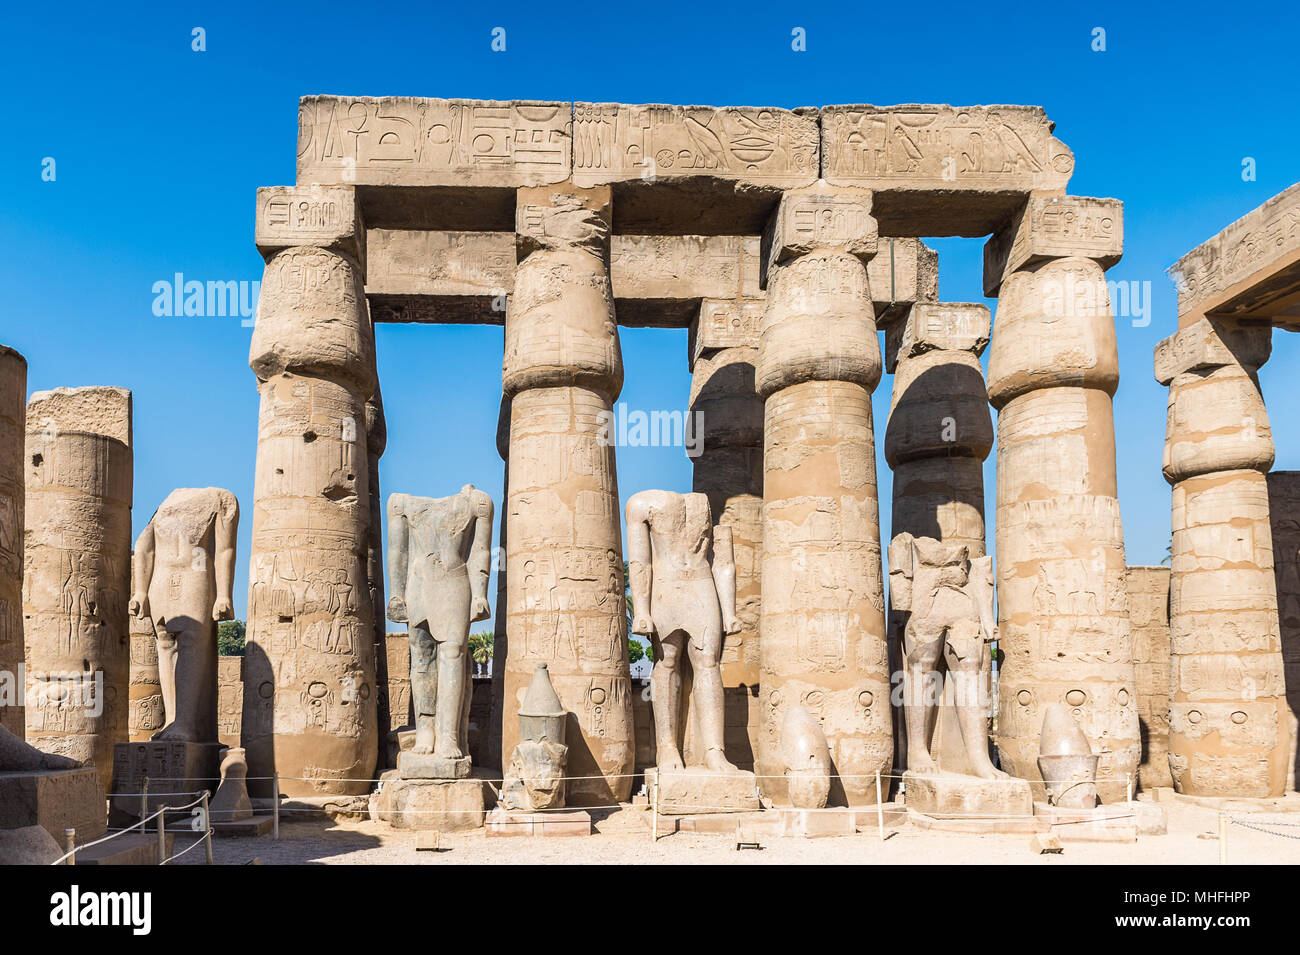 Columns Of The Luxor Temple A Large Ancient Egyptian Temple East Bank Of The Nile Egypt Unesco World Heritage Stock Photo Alamy